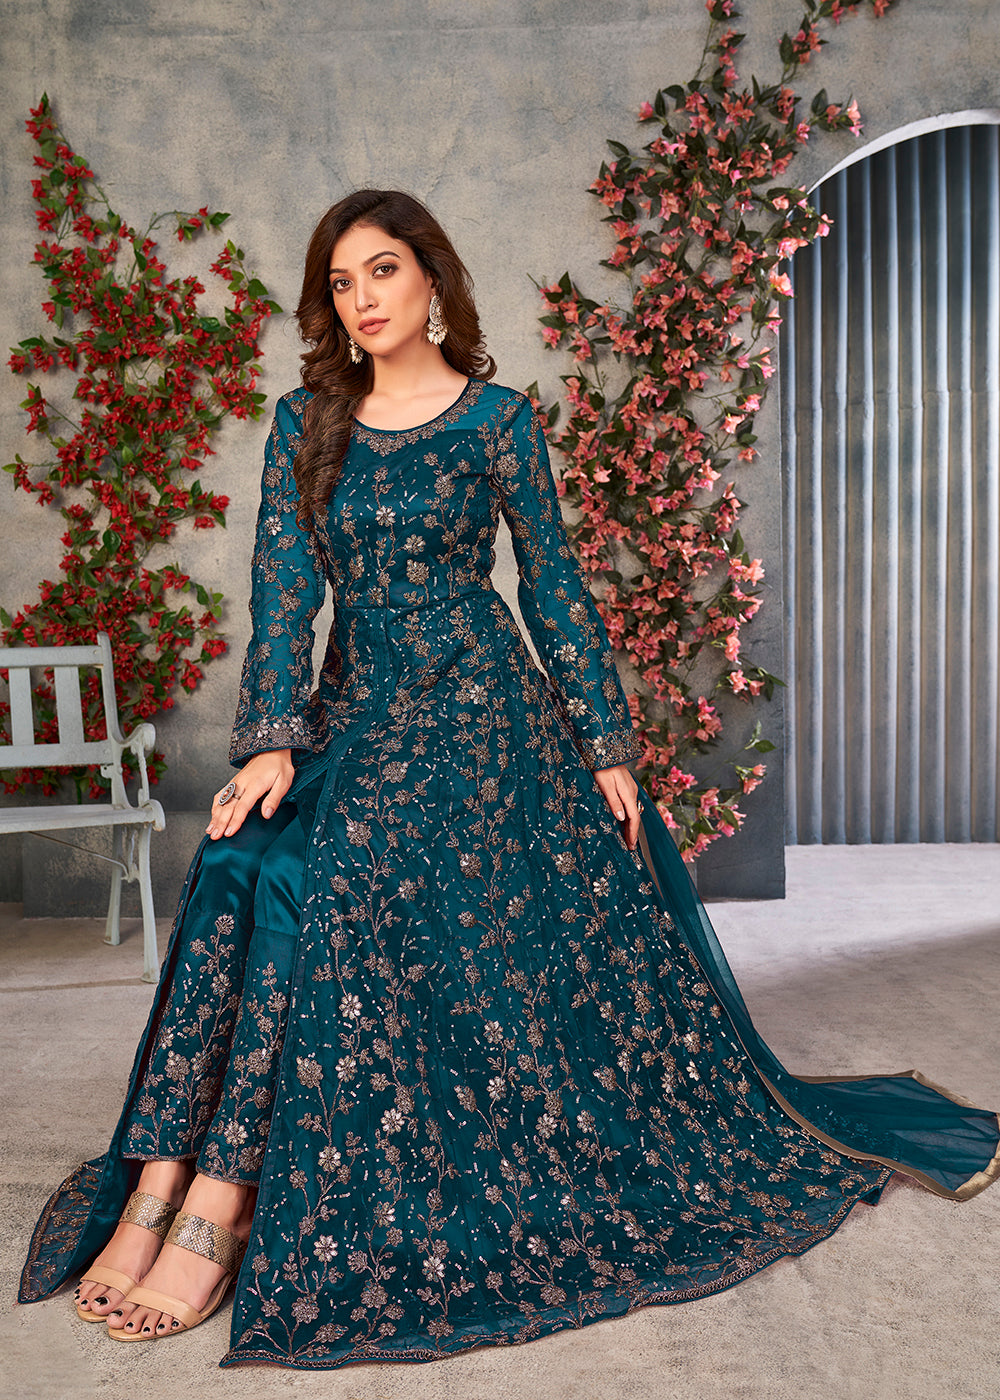 Buy Now Vintage Teal Blue Wedding Function Pant Style Anarkali Suit Online in USA, UK, Australia, New Zealand, Canada & Worldwide at Empress Clothing.